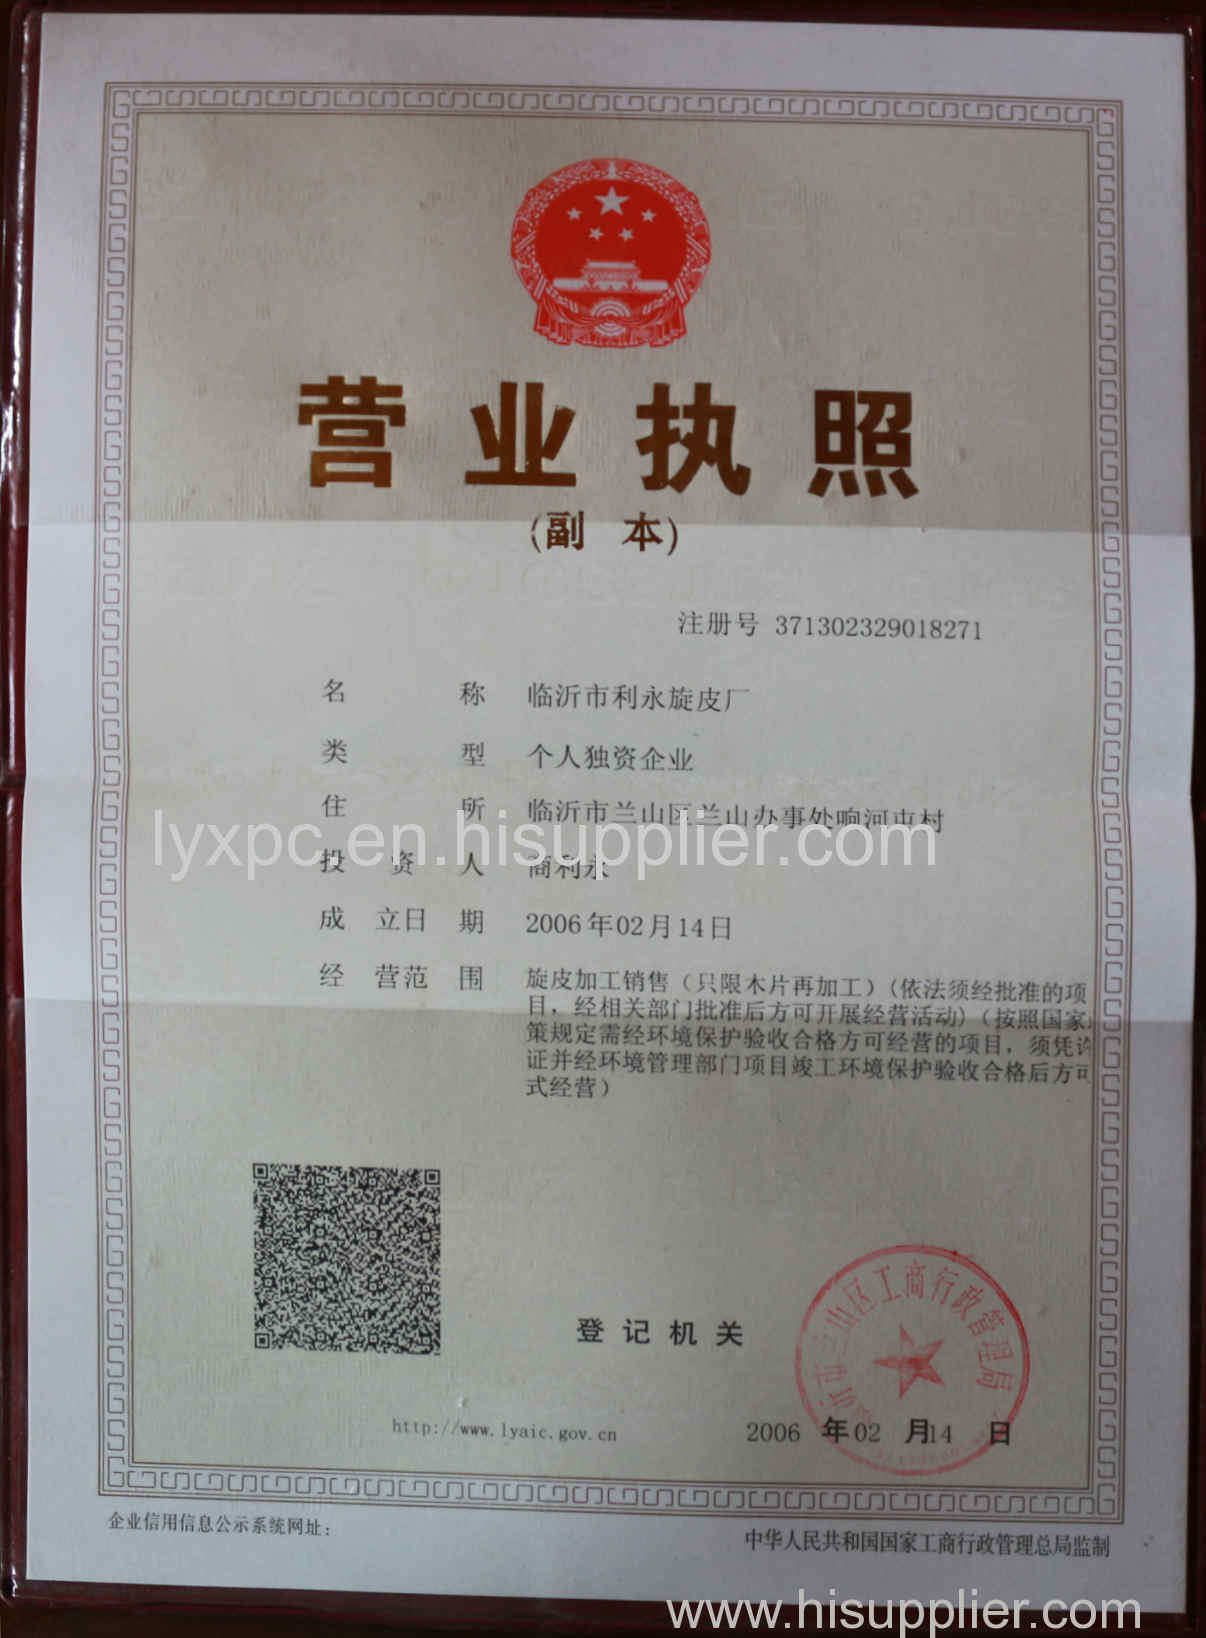 The business license